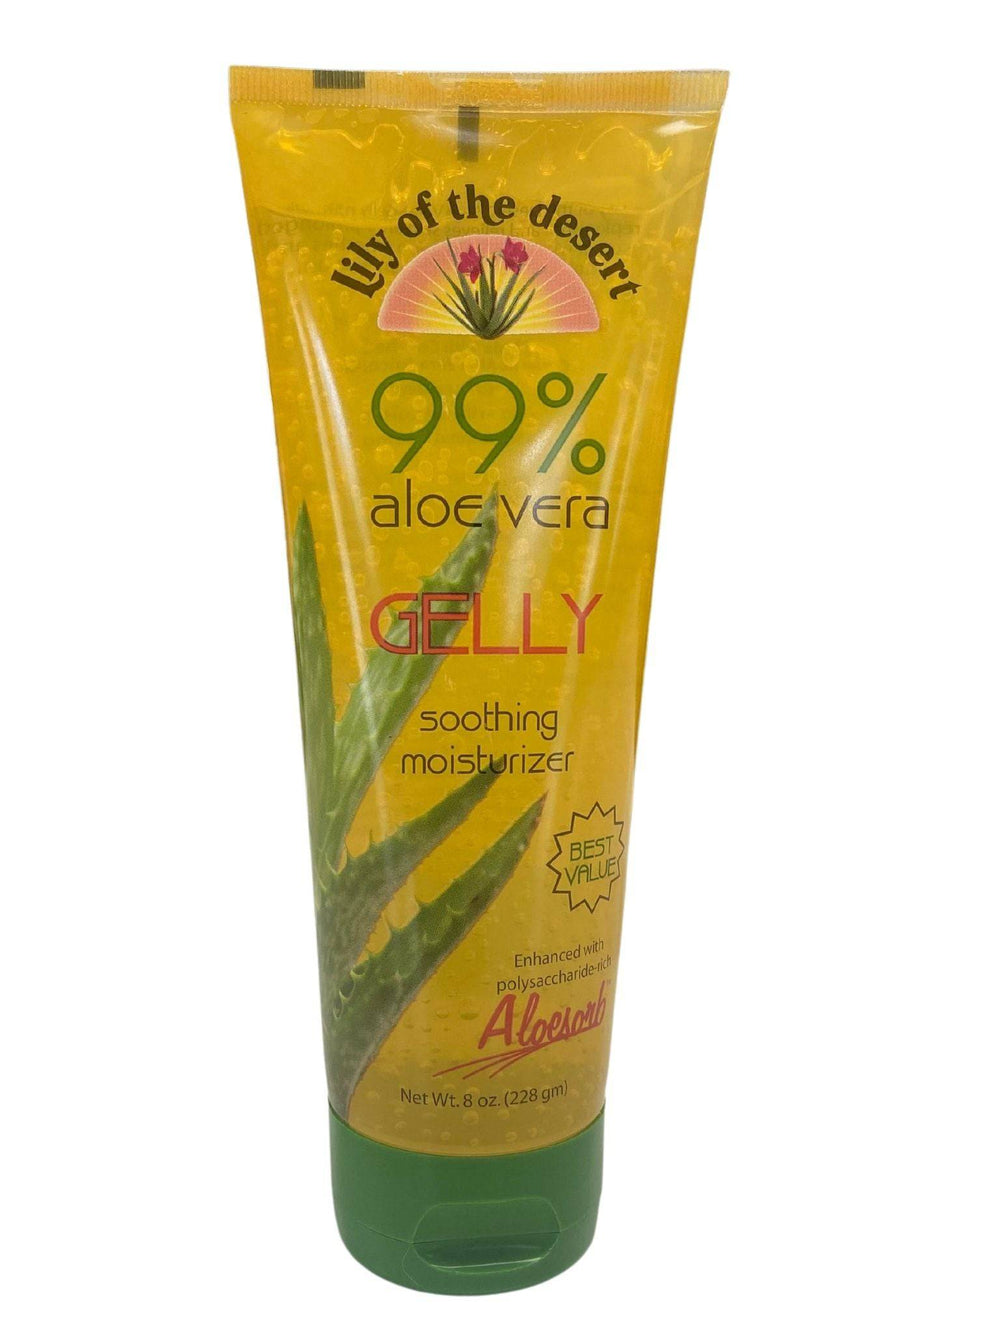 99% Aloe Vera Gelly - Country Life Natural Foods